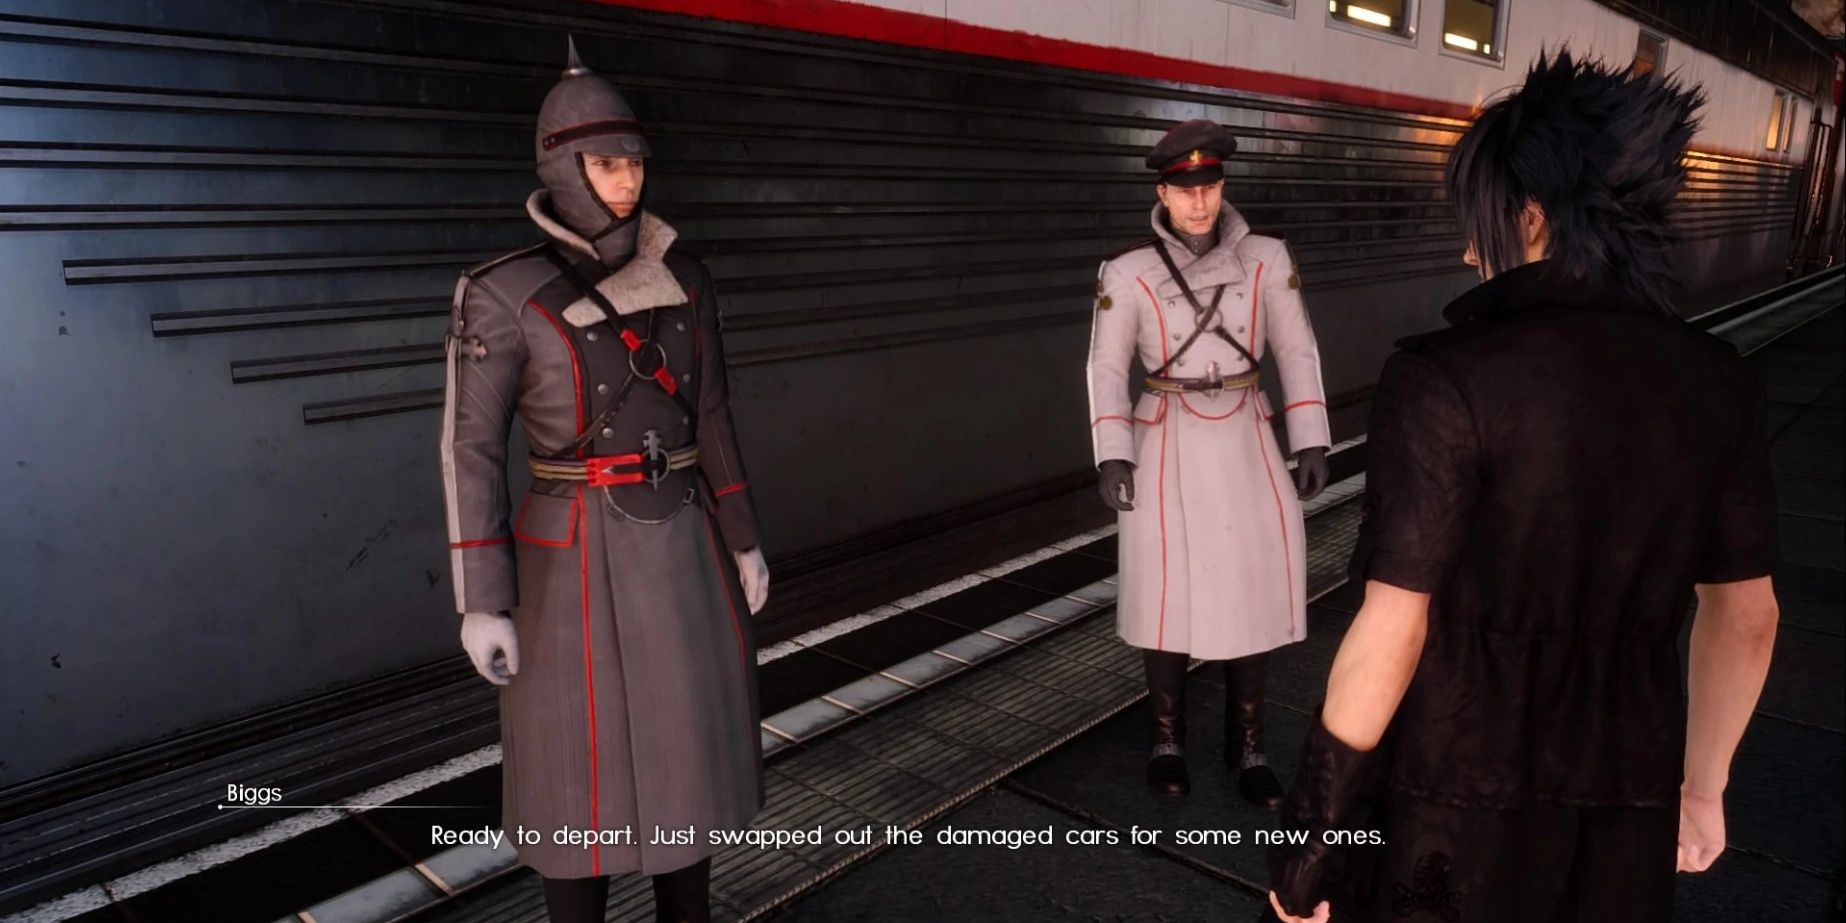 Wedge (left) and Biggs (middle) talk to Noctis (right). Not pictured, Aranea, Wedge and Biggs' boss.